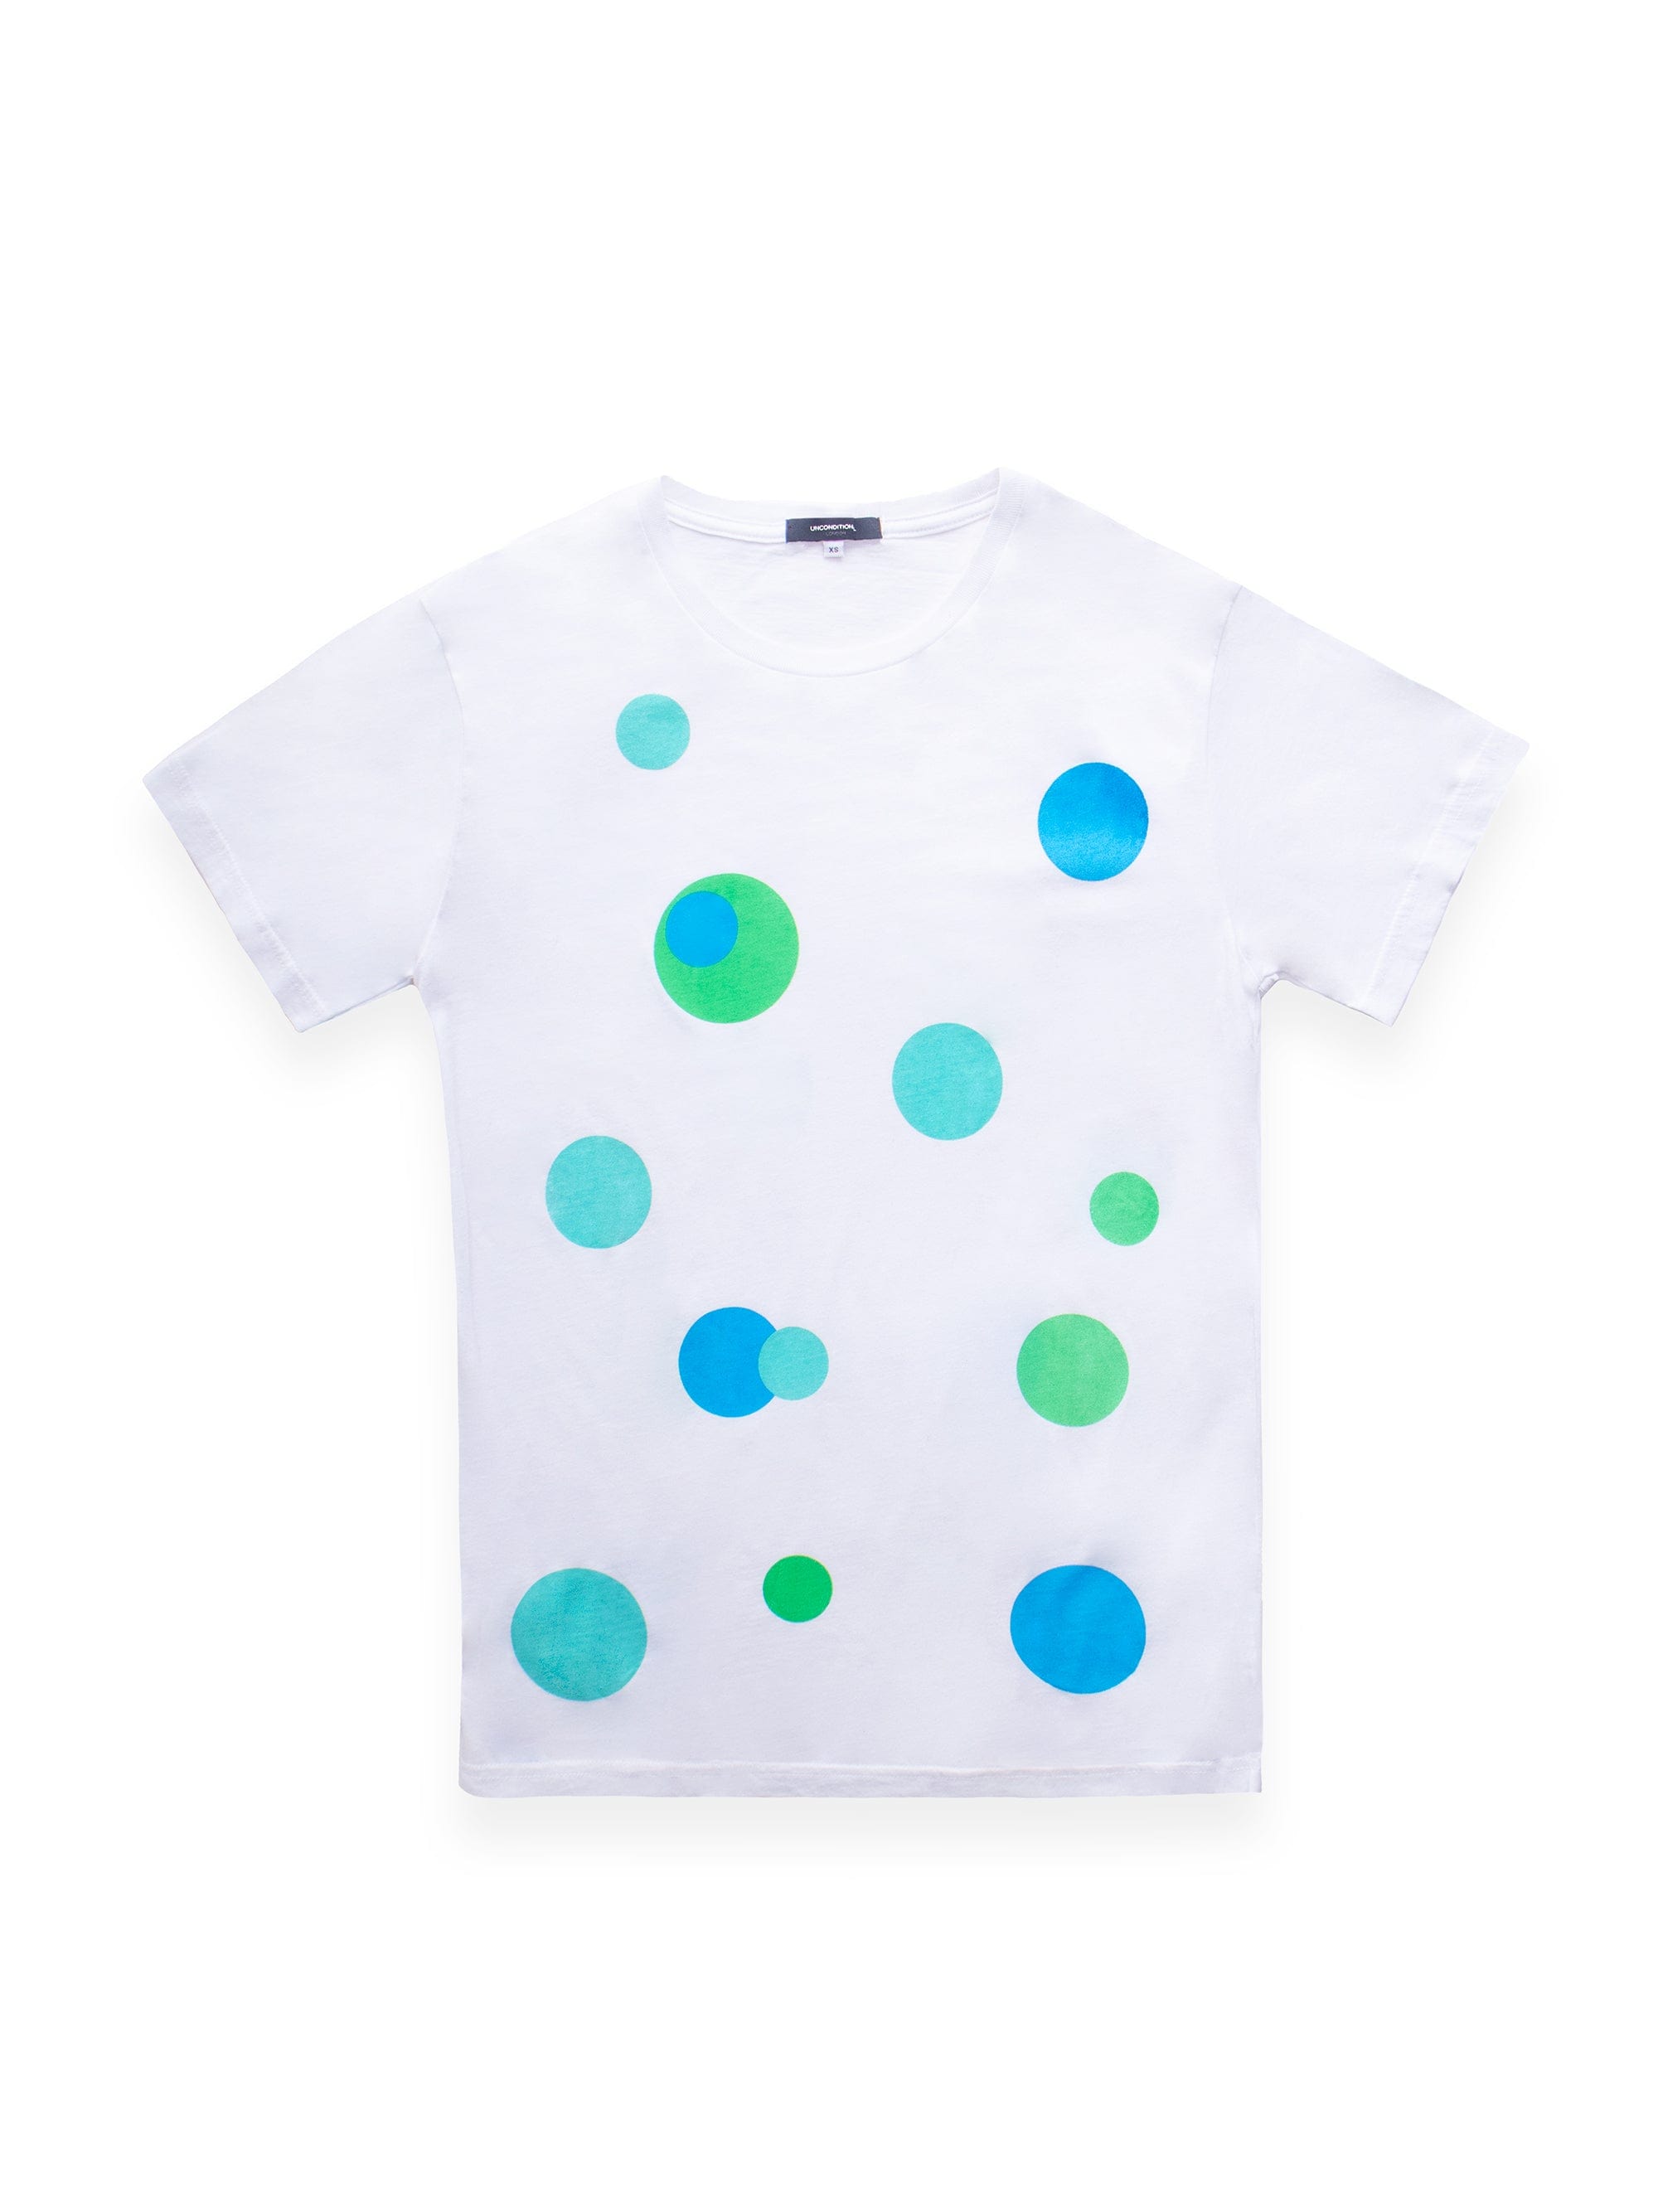 White T-Shirt With Green And Blue Circle Patterns